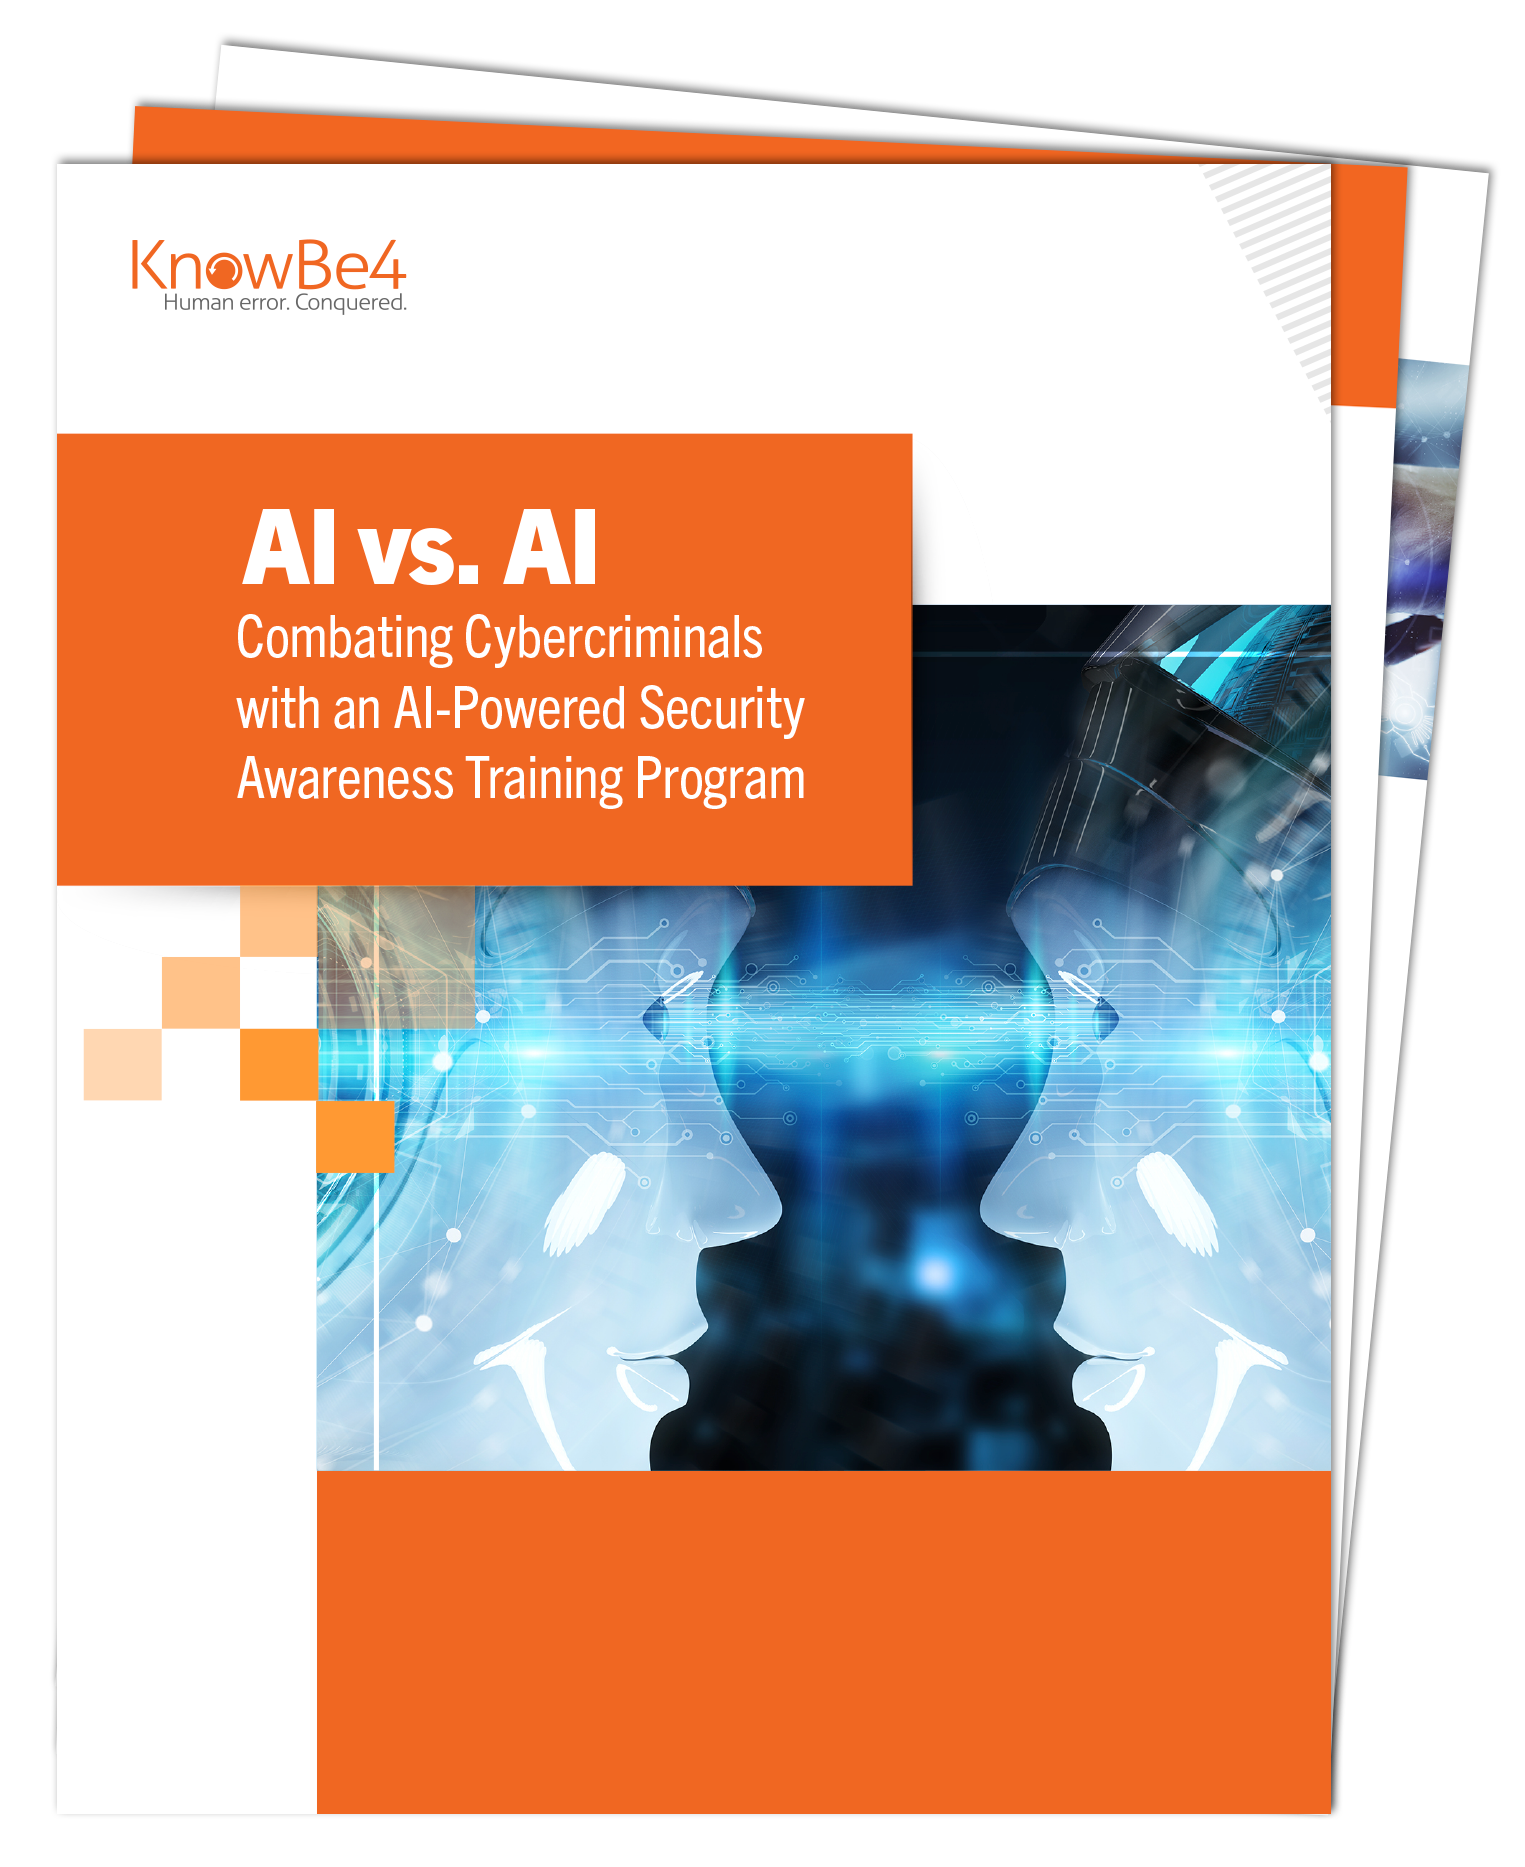 Whitepaper: AI vs. AI: Combating Cybercriminals with an AI-Powered Security Awareness Training Program